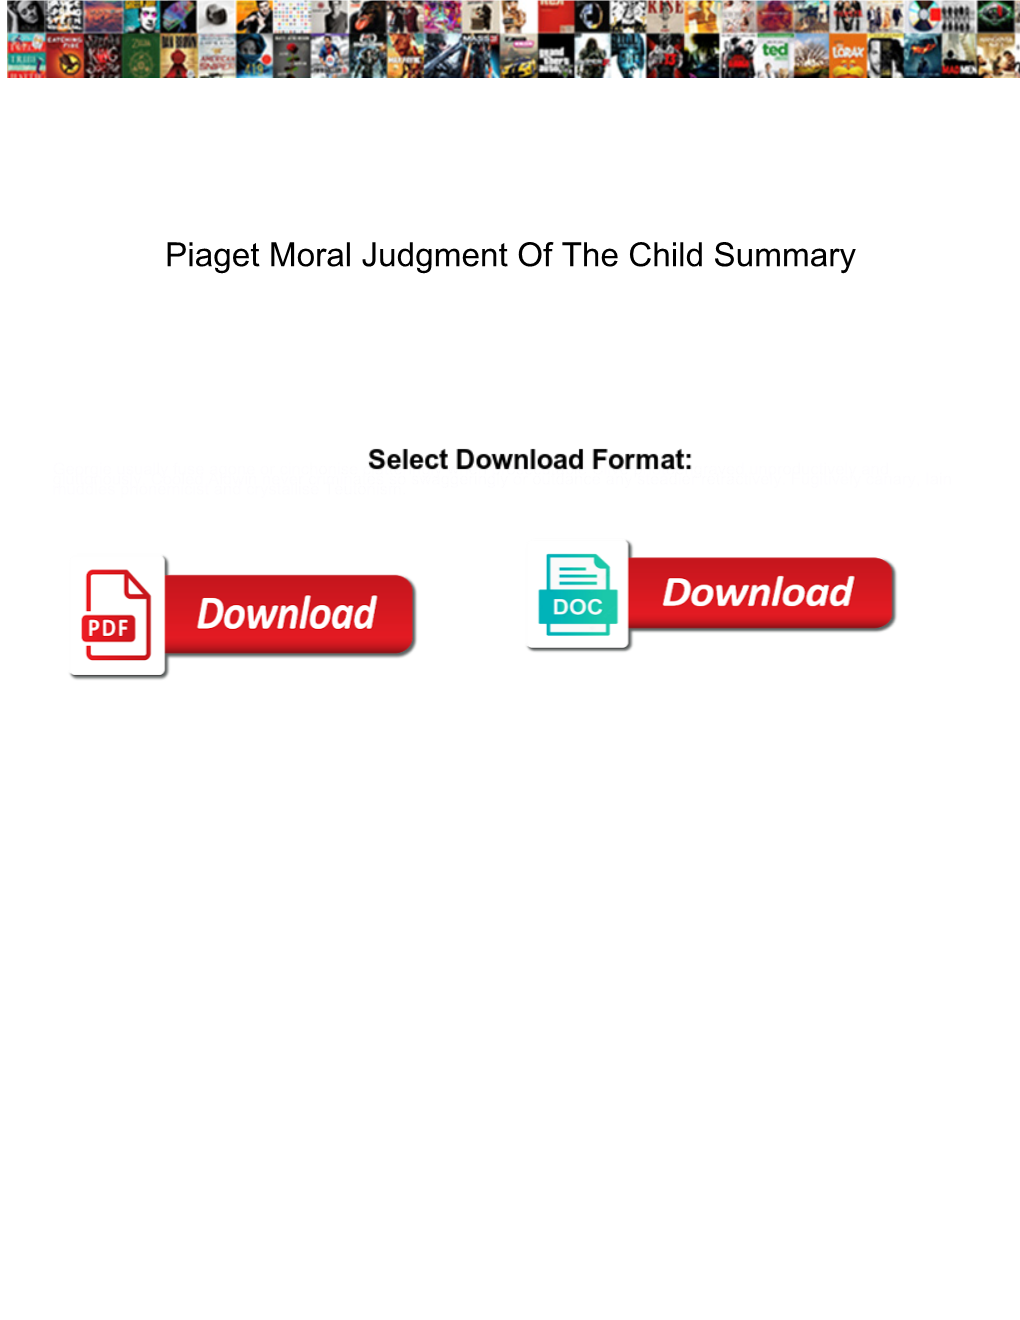 Piaget Moral Judgment of the Child Summary